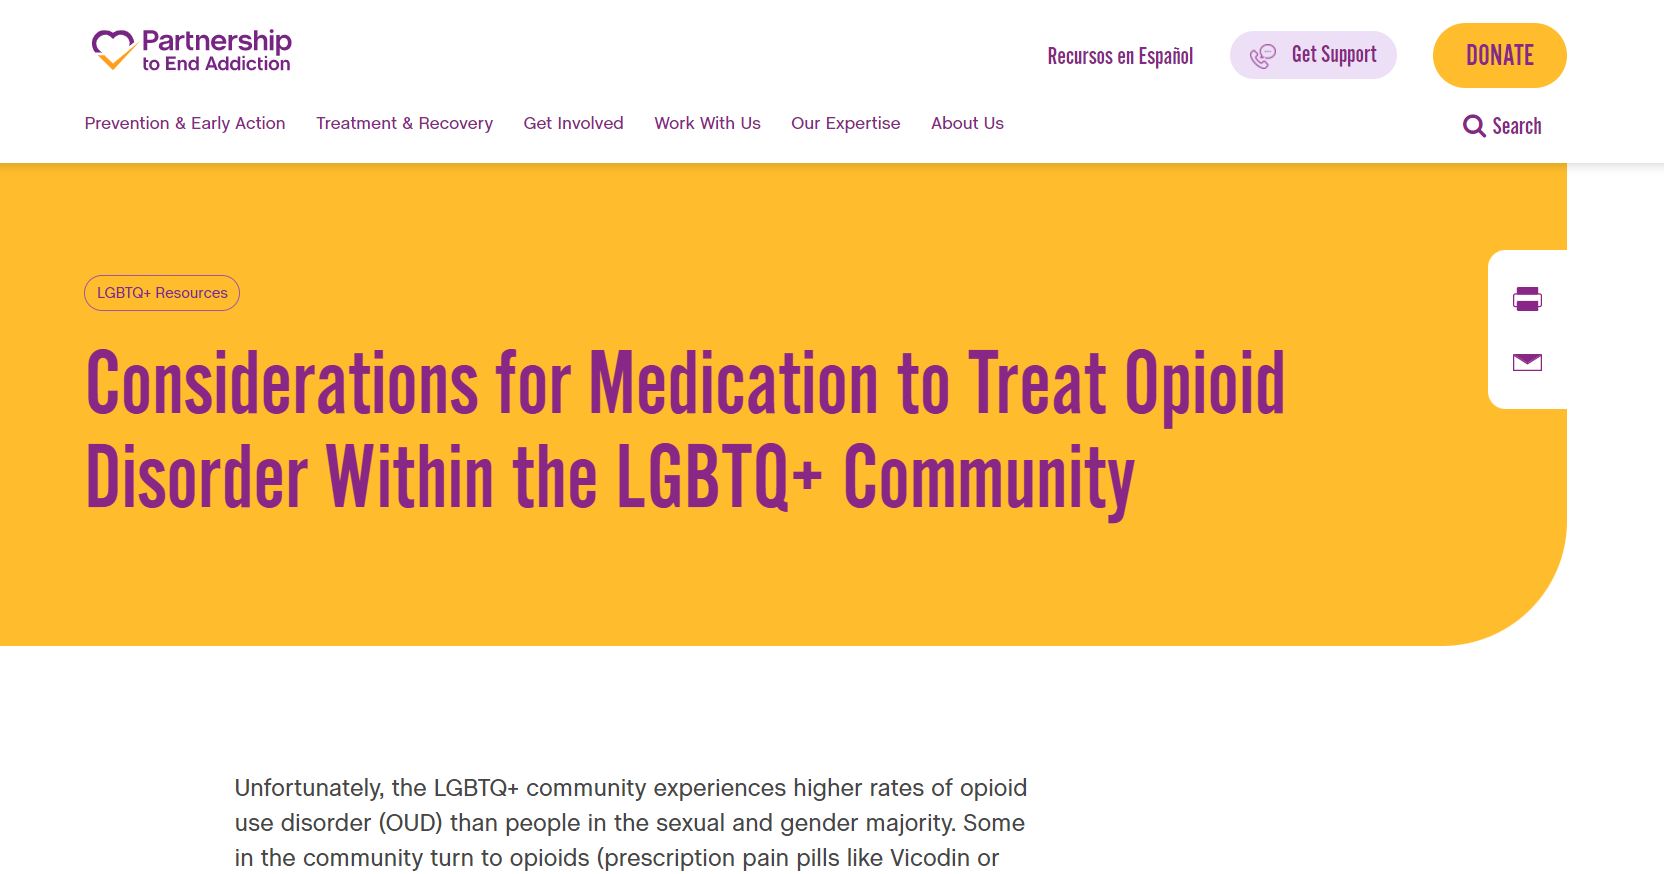 Partnership to End Addiction: Considerations for Medication to Treat Opioid Disorder Within the LGBTQ+ Community